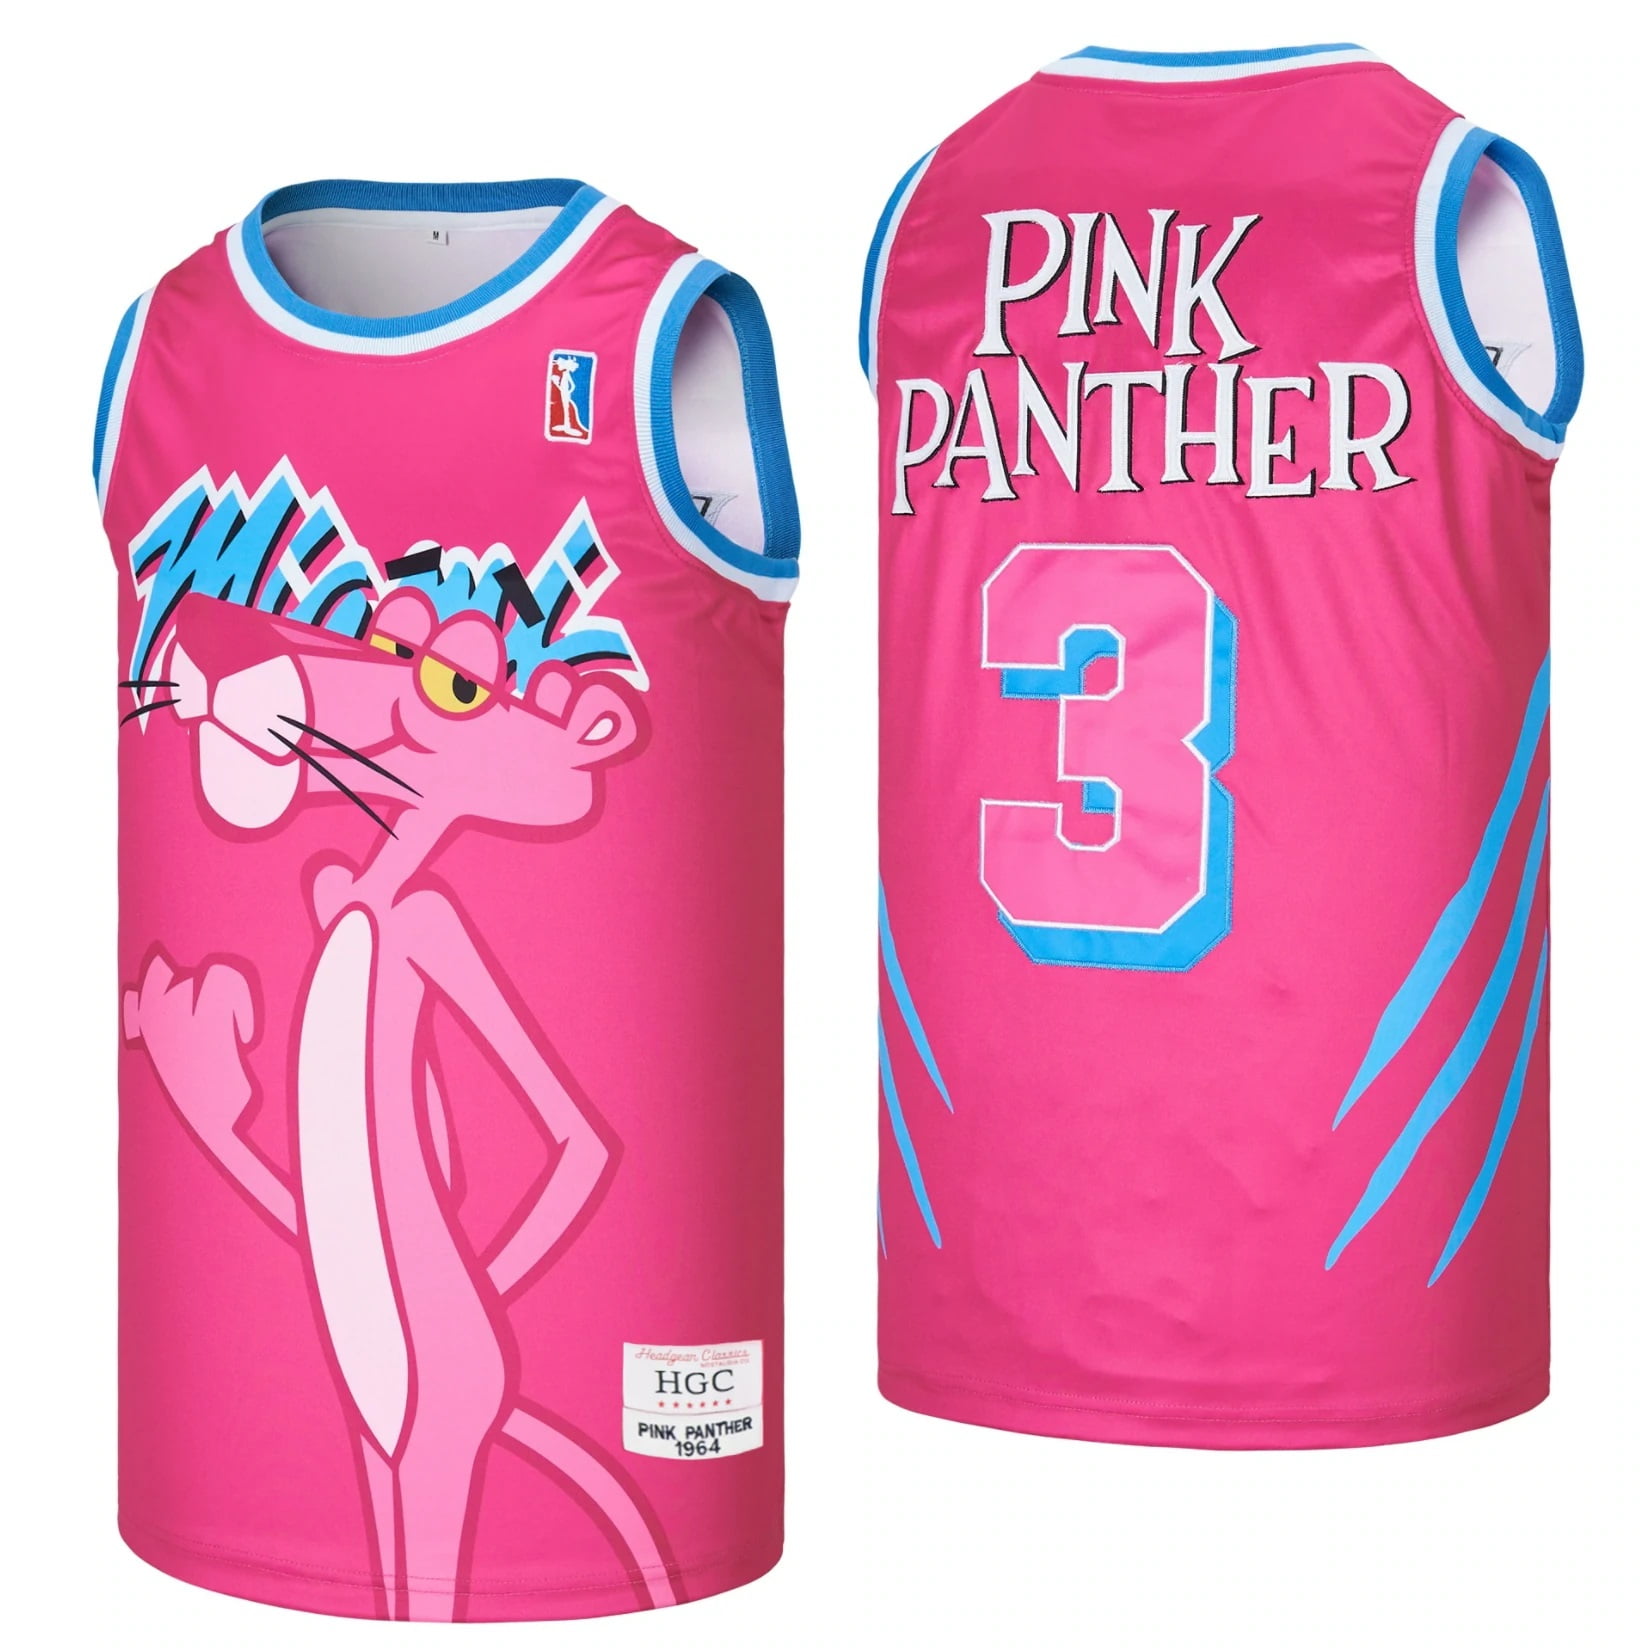 Pink Panther Jersey – US Soccer Hall